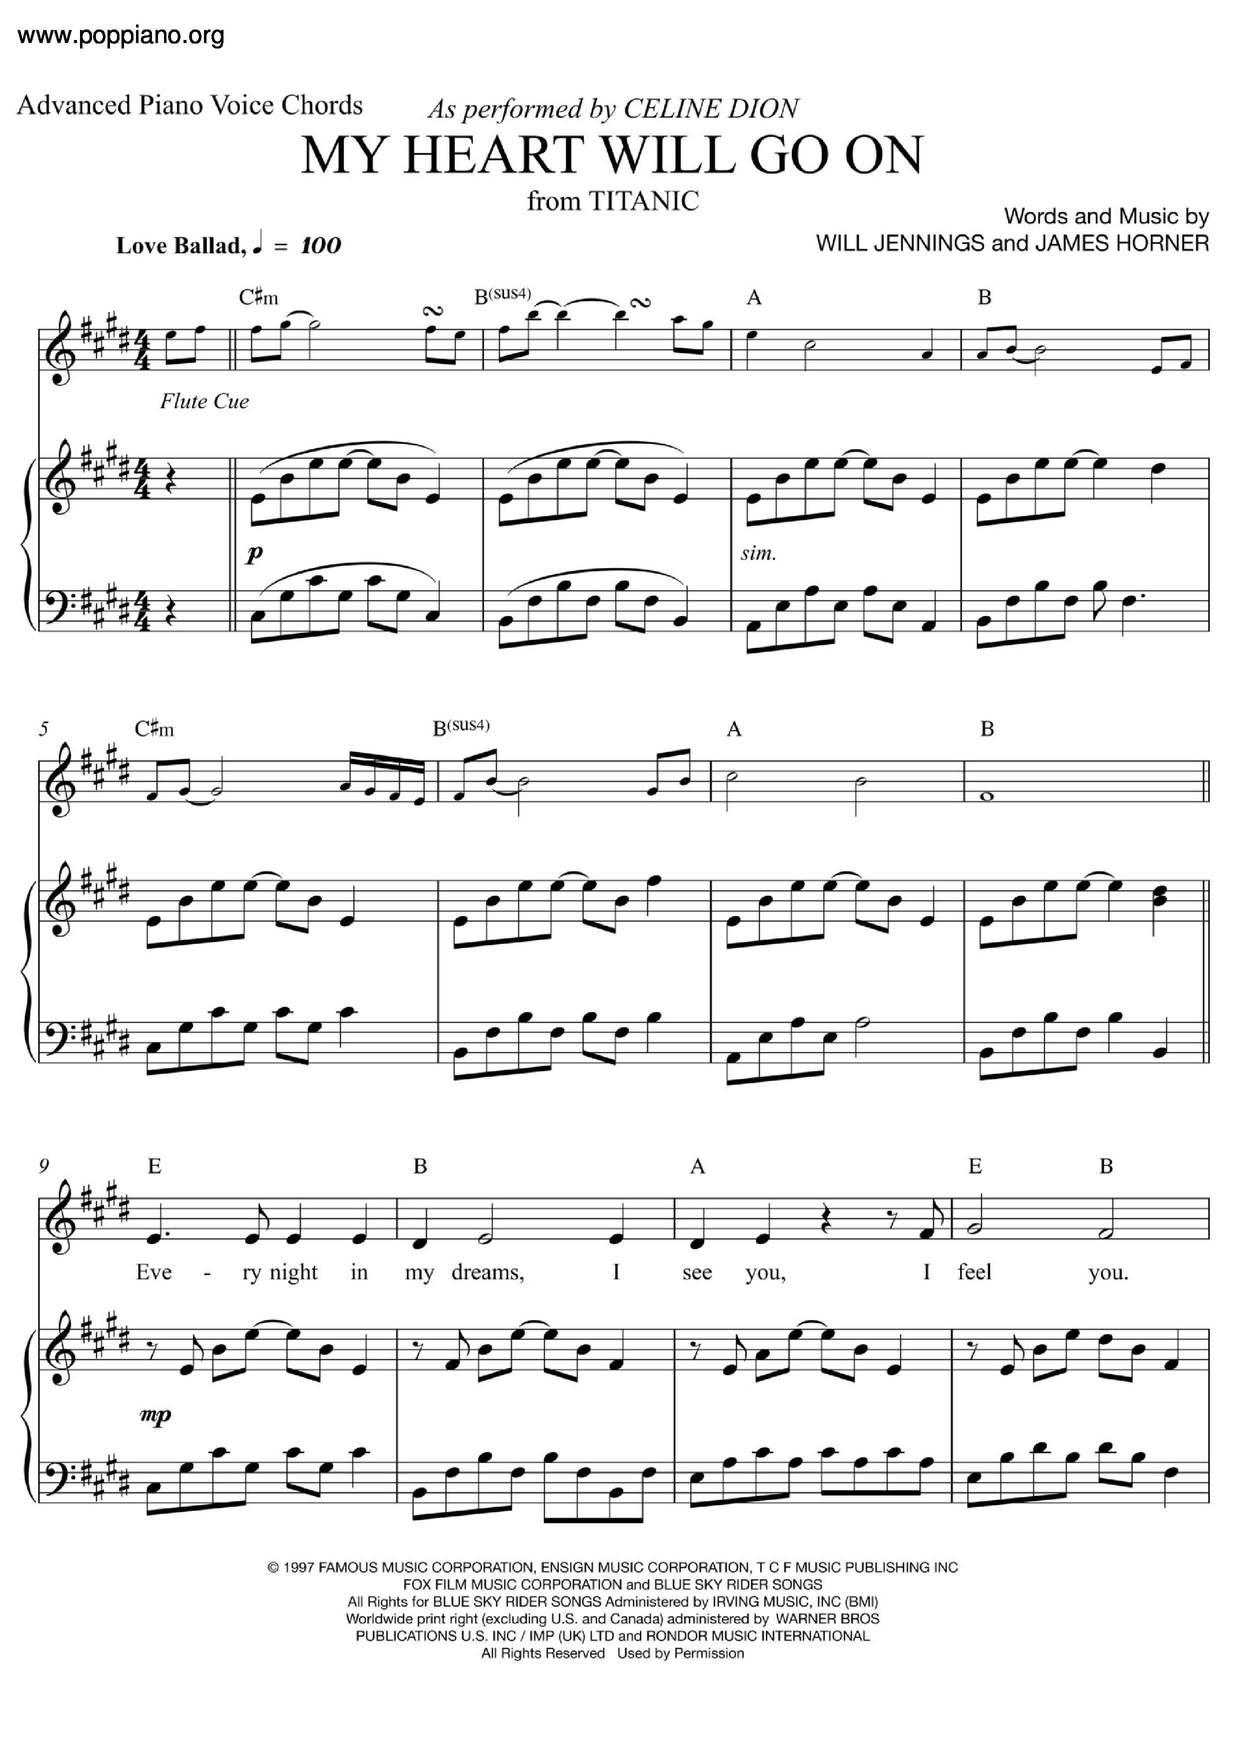 Celine Dion My Heart Will Go On Sheet Music Pdf マイハート ウィル ゴー オン 楽譜 Free Score Download